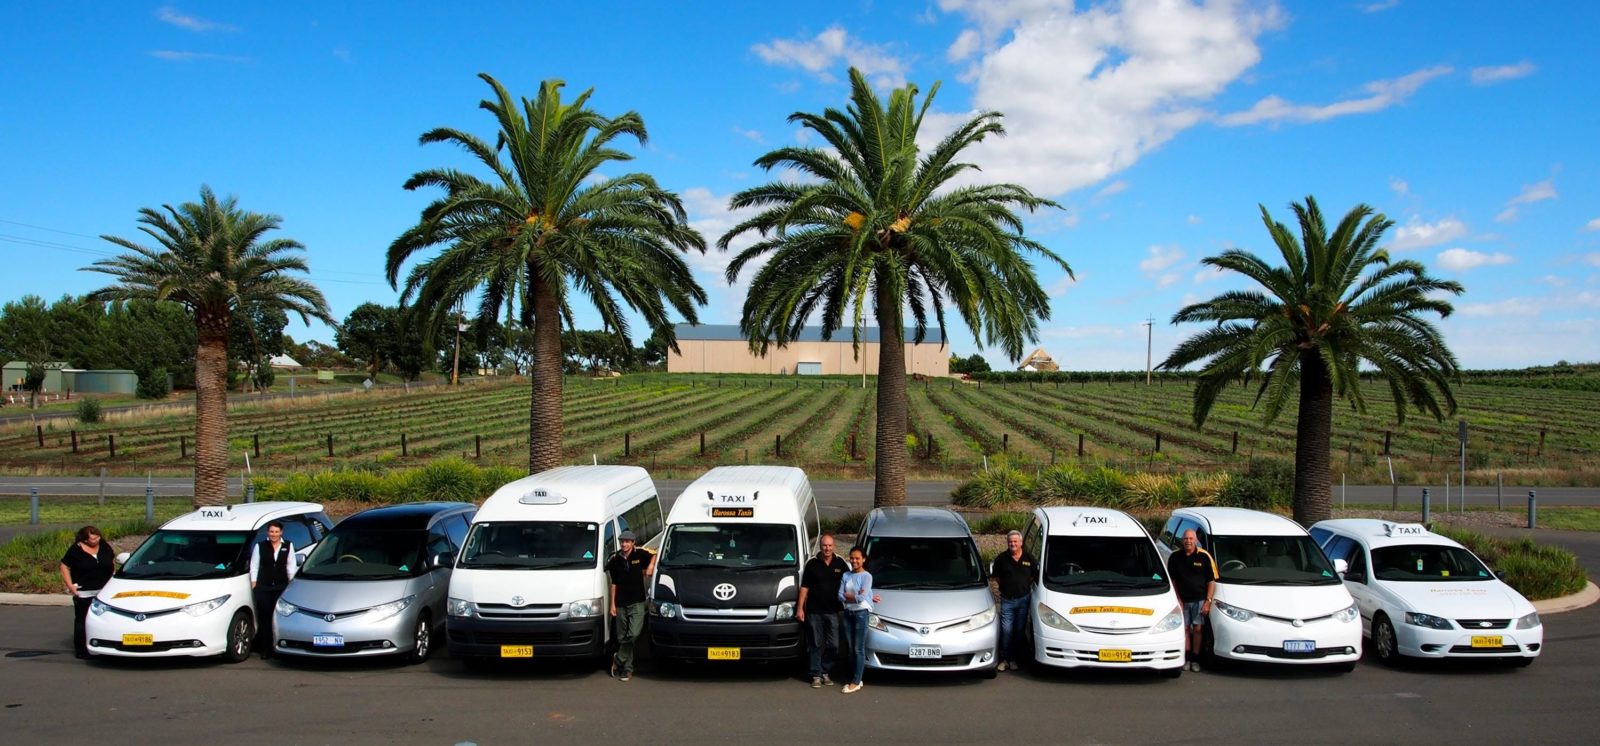 Barossa Mini Tours - Wineries - Chocolate - Dining - Places of Interest. Large Groups or Small.